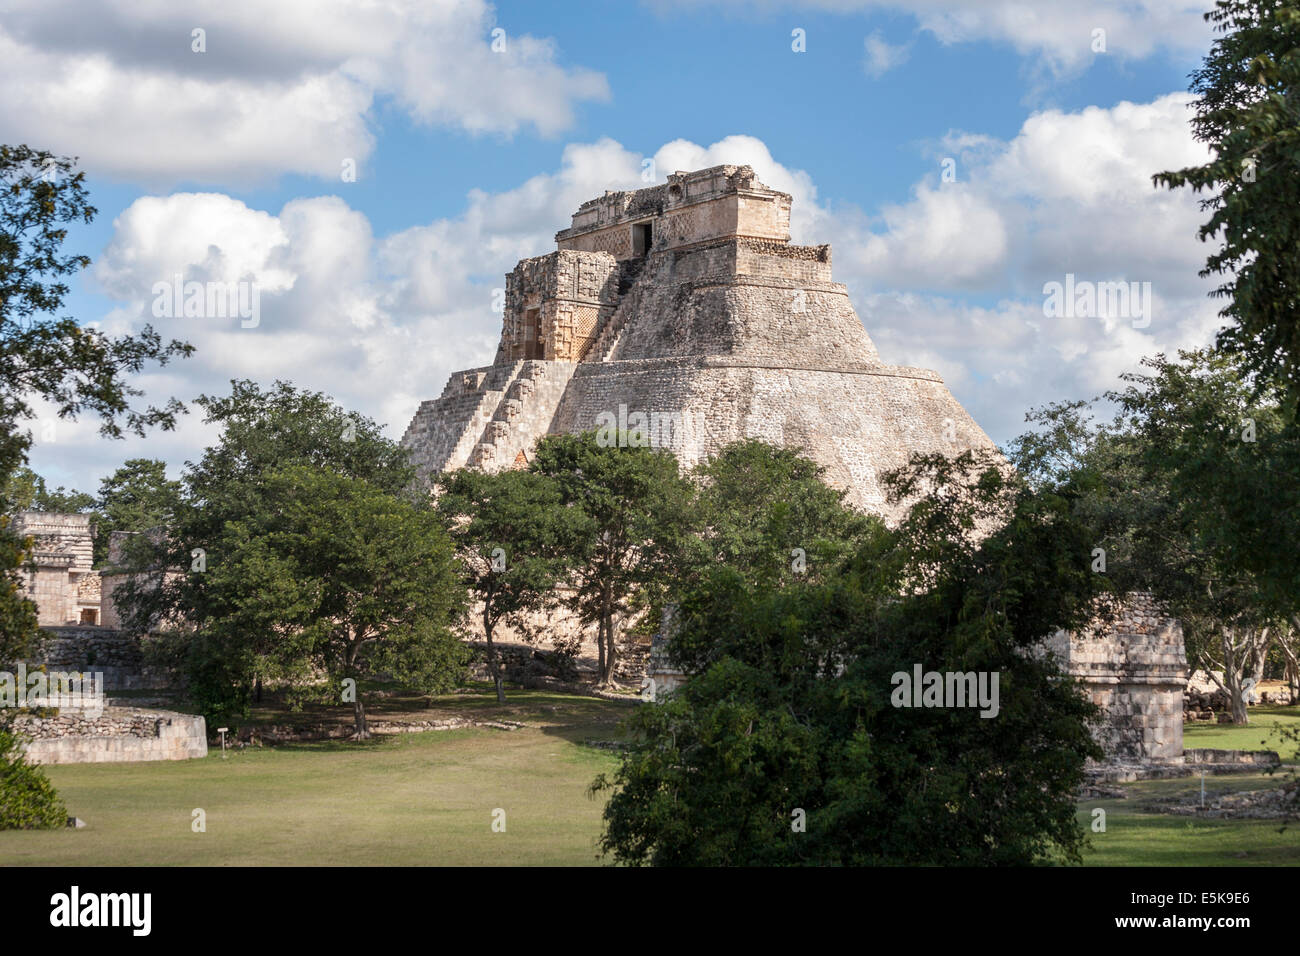 Uxmal's Mayan Pyramid of the Magician rises above the trees. The massive stone structure rises majestically dominating. Stock Photo